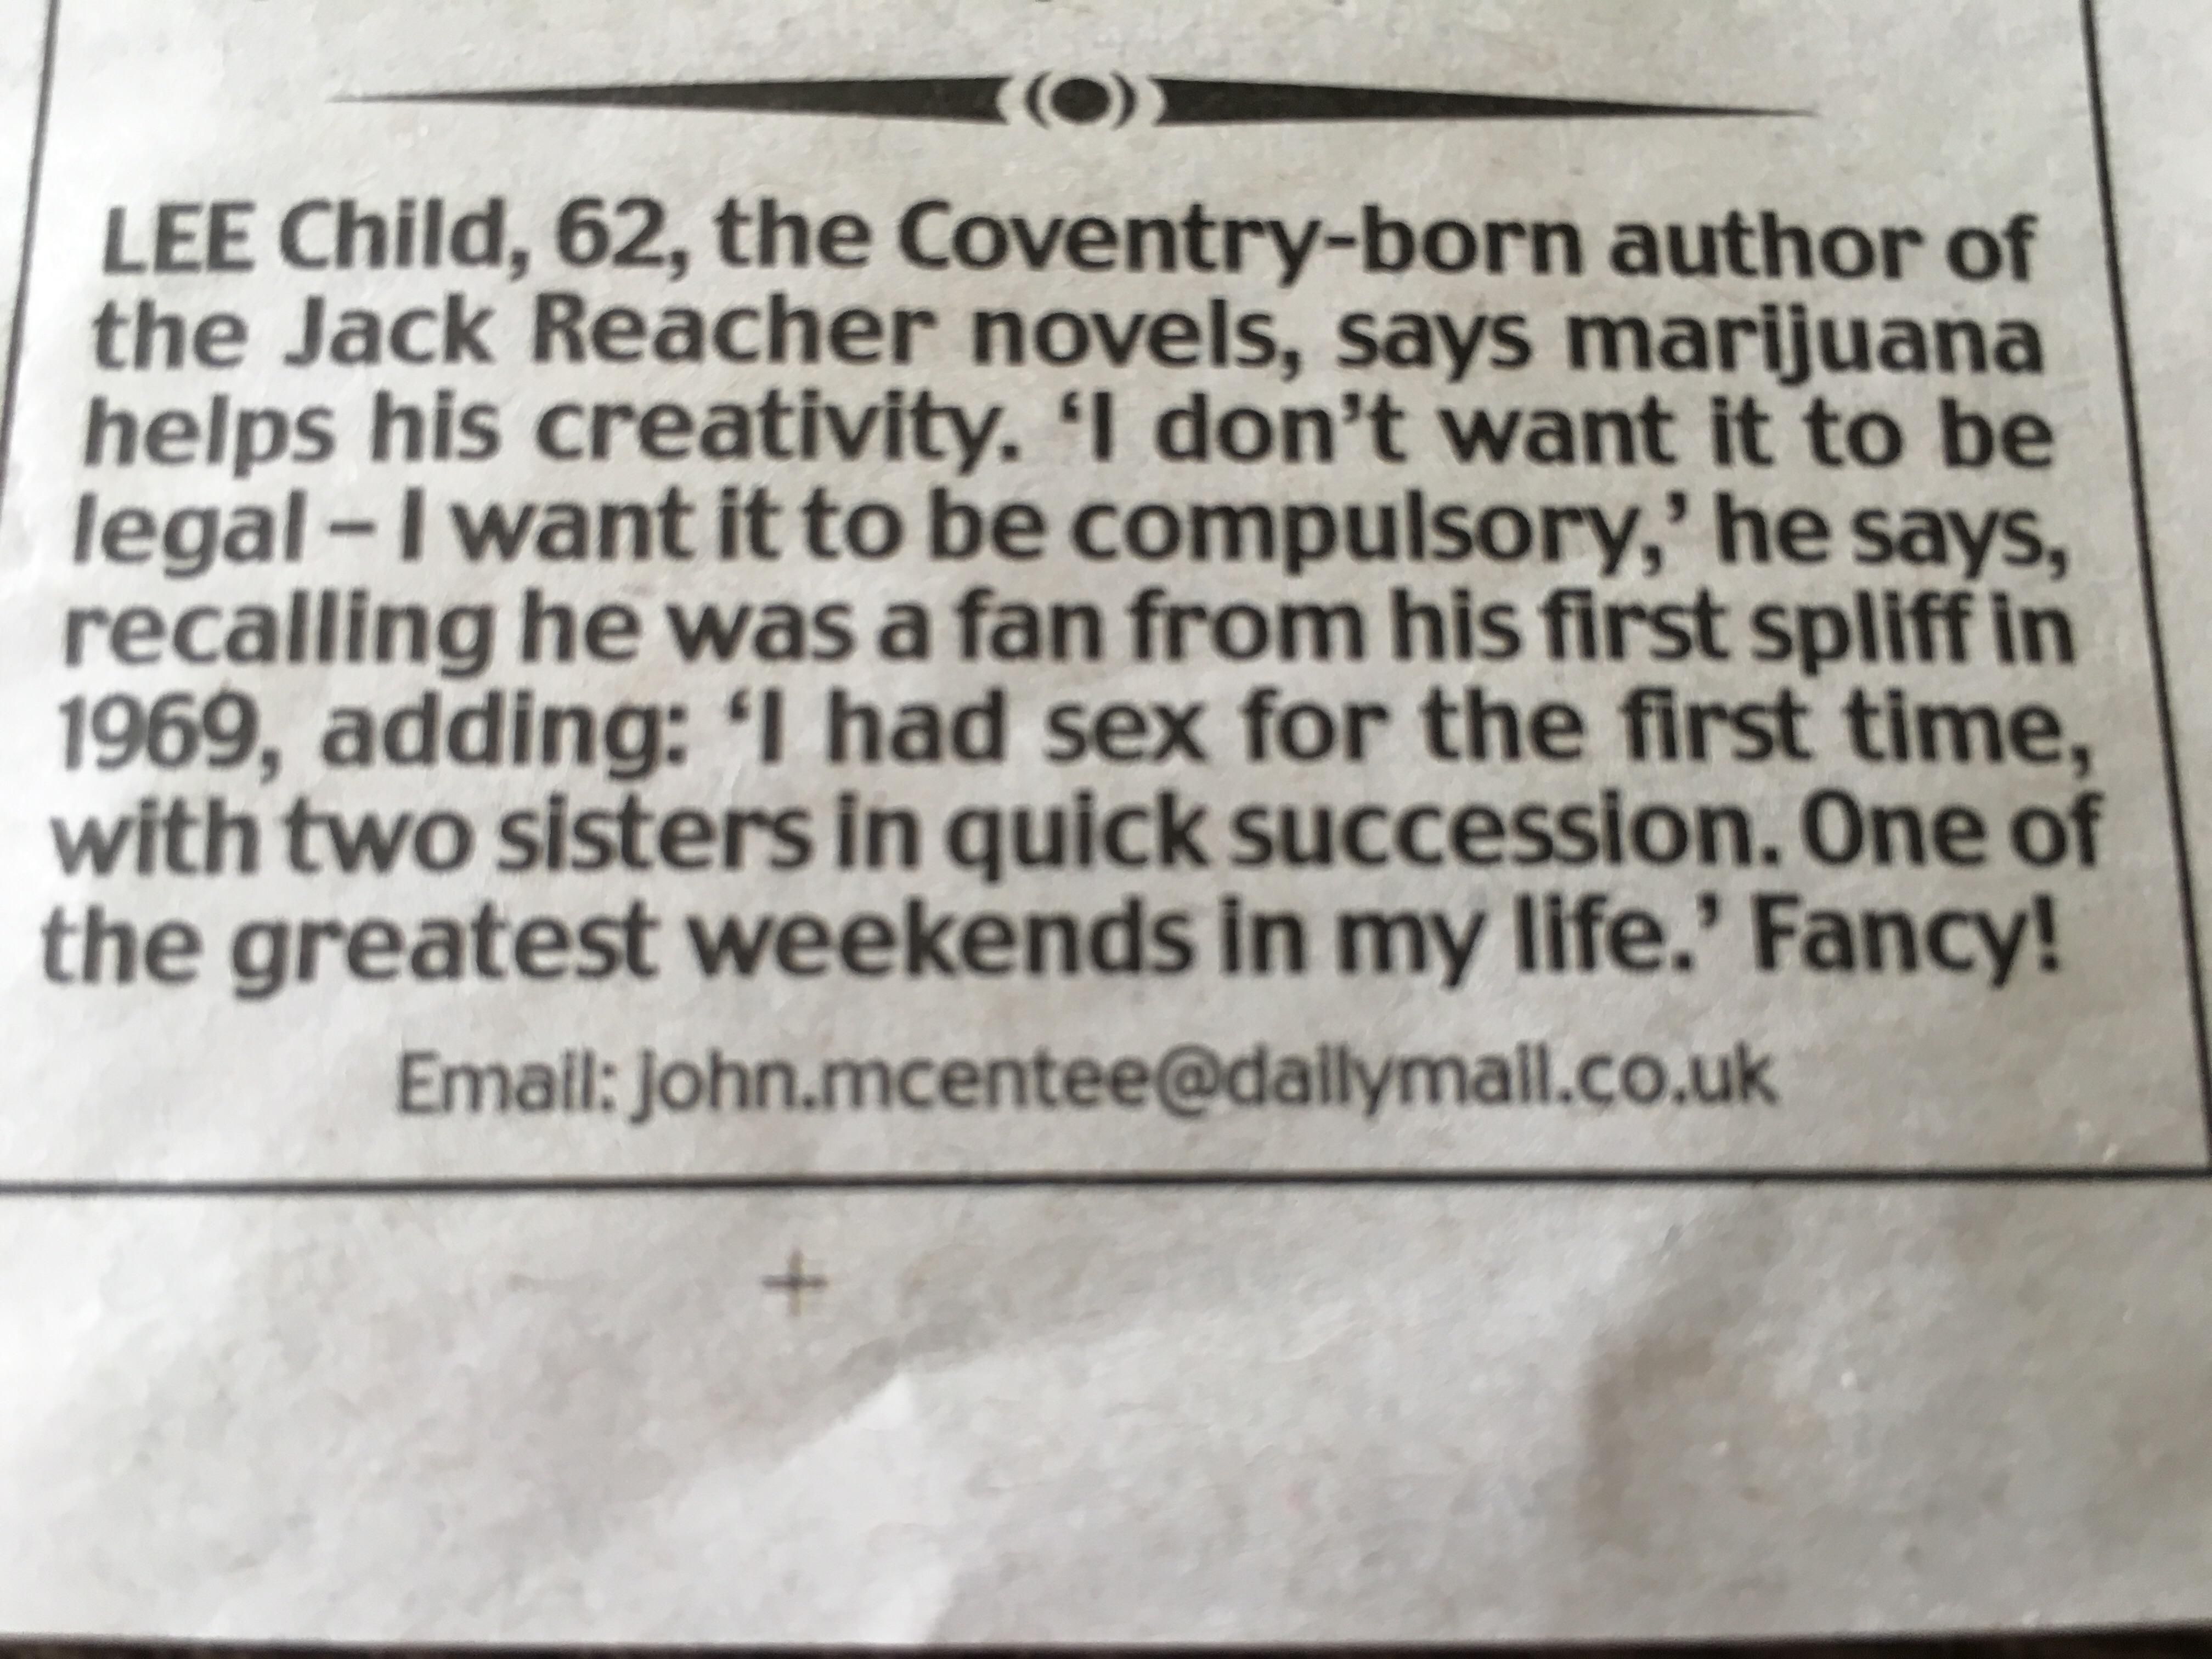 Lee Child had a great weekend